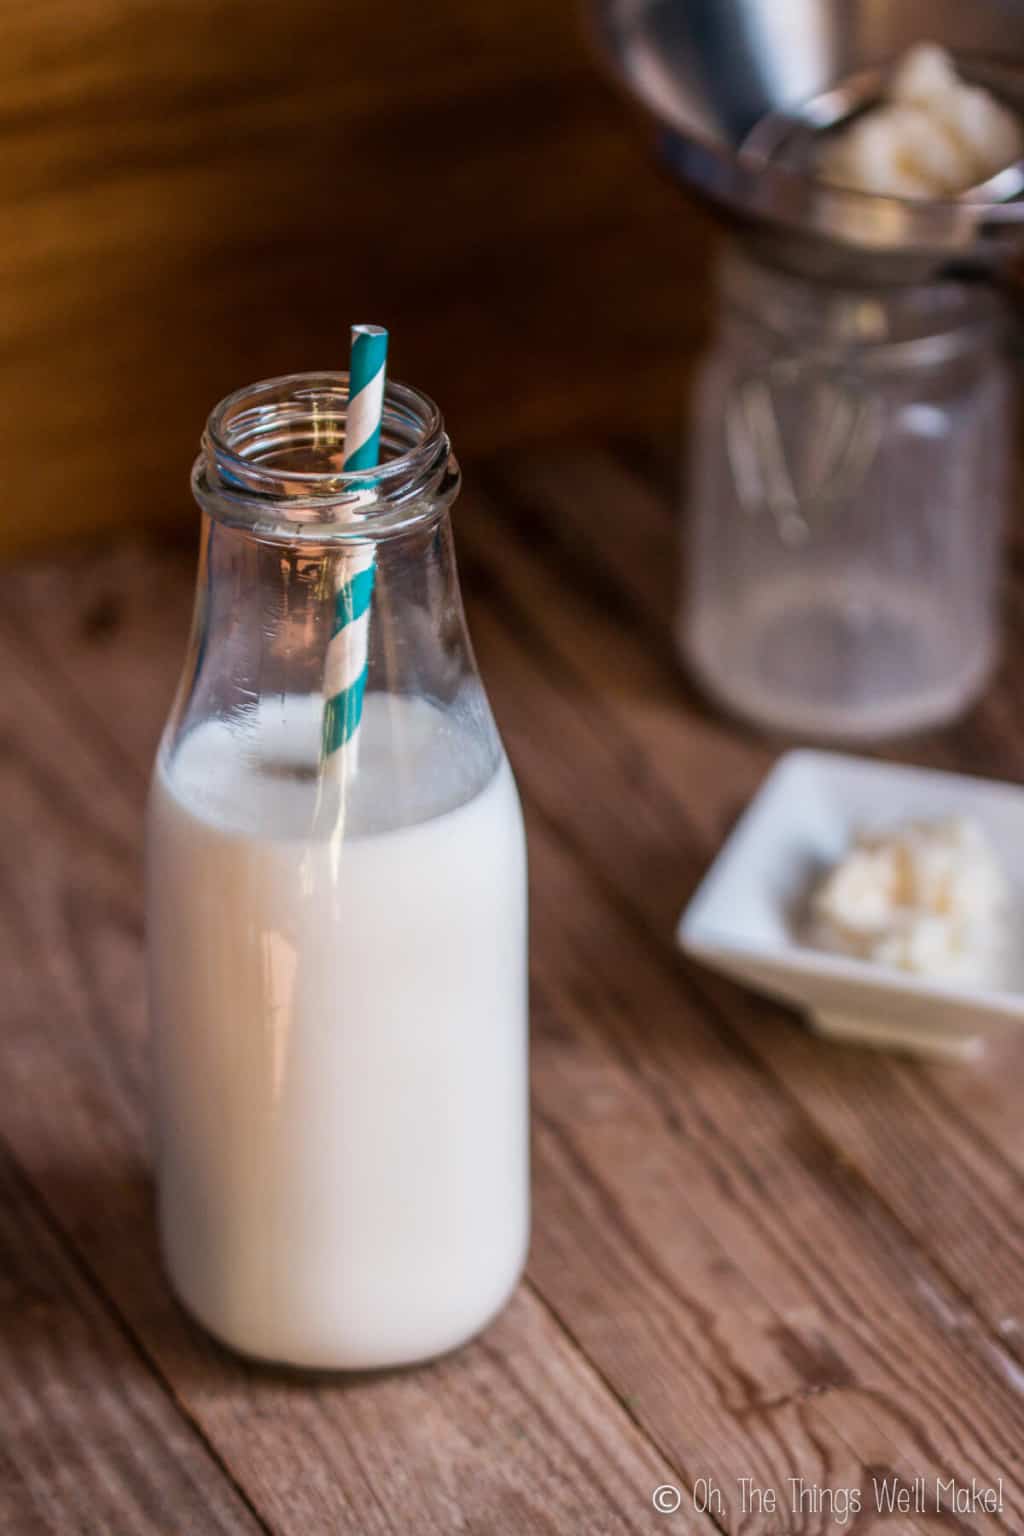 A bottle of kefir with a white and blue striped paper straw in it, next to some kefir grains